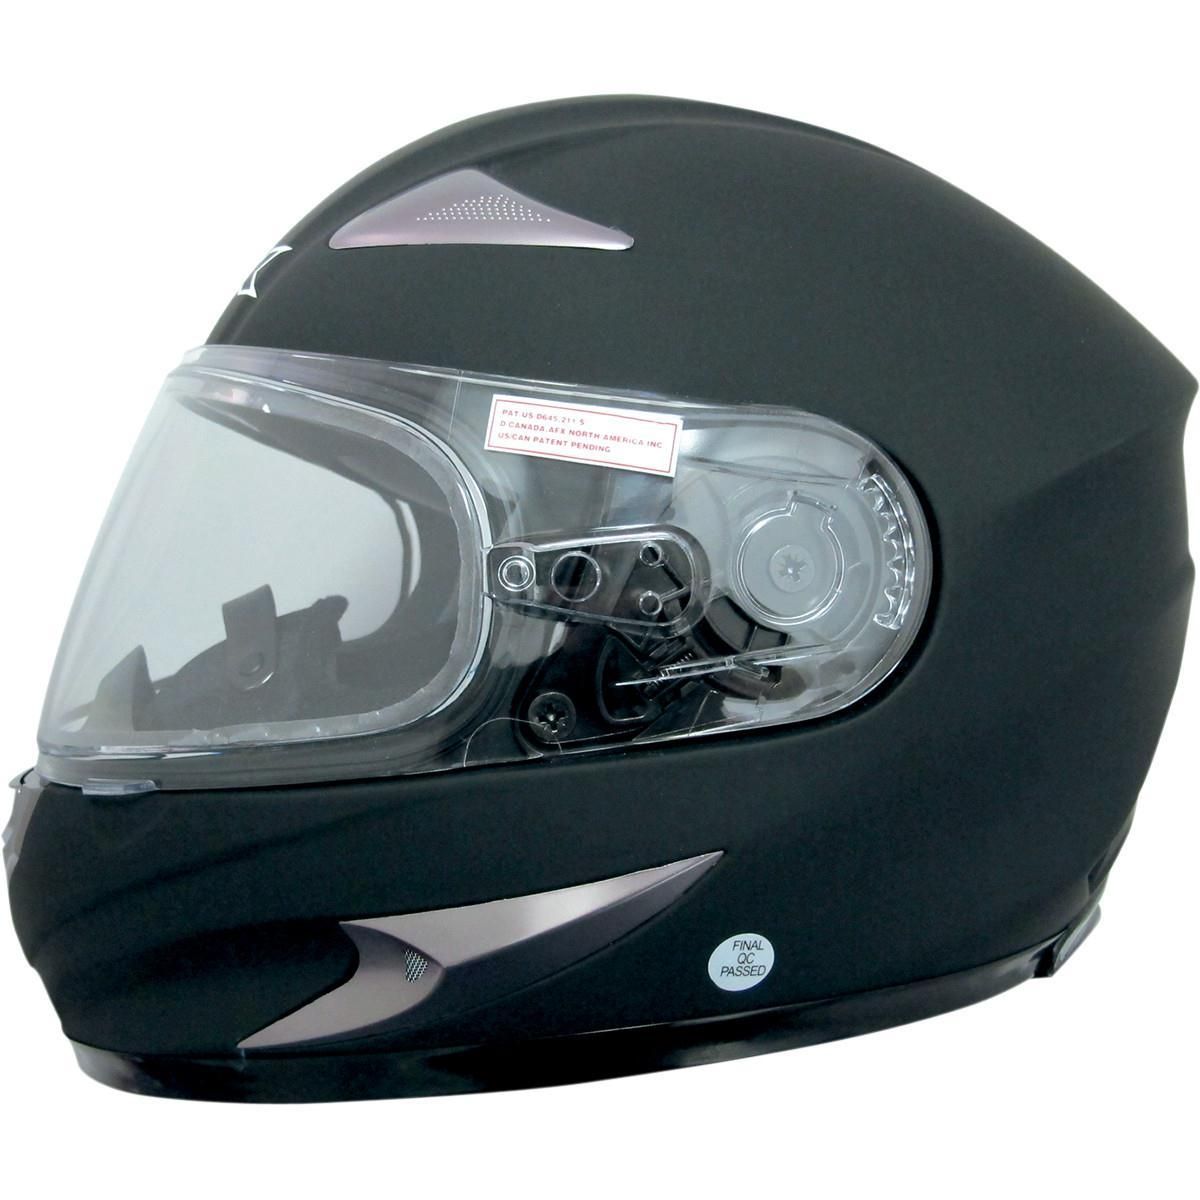 3L4-AFX-0121-0465 FX-90S Snow Solid Helmet with Dual Lens Shield